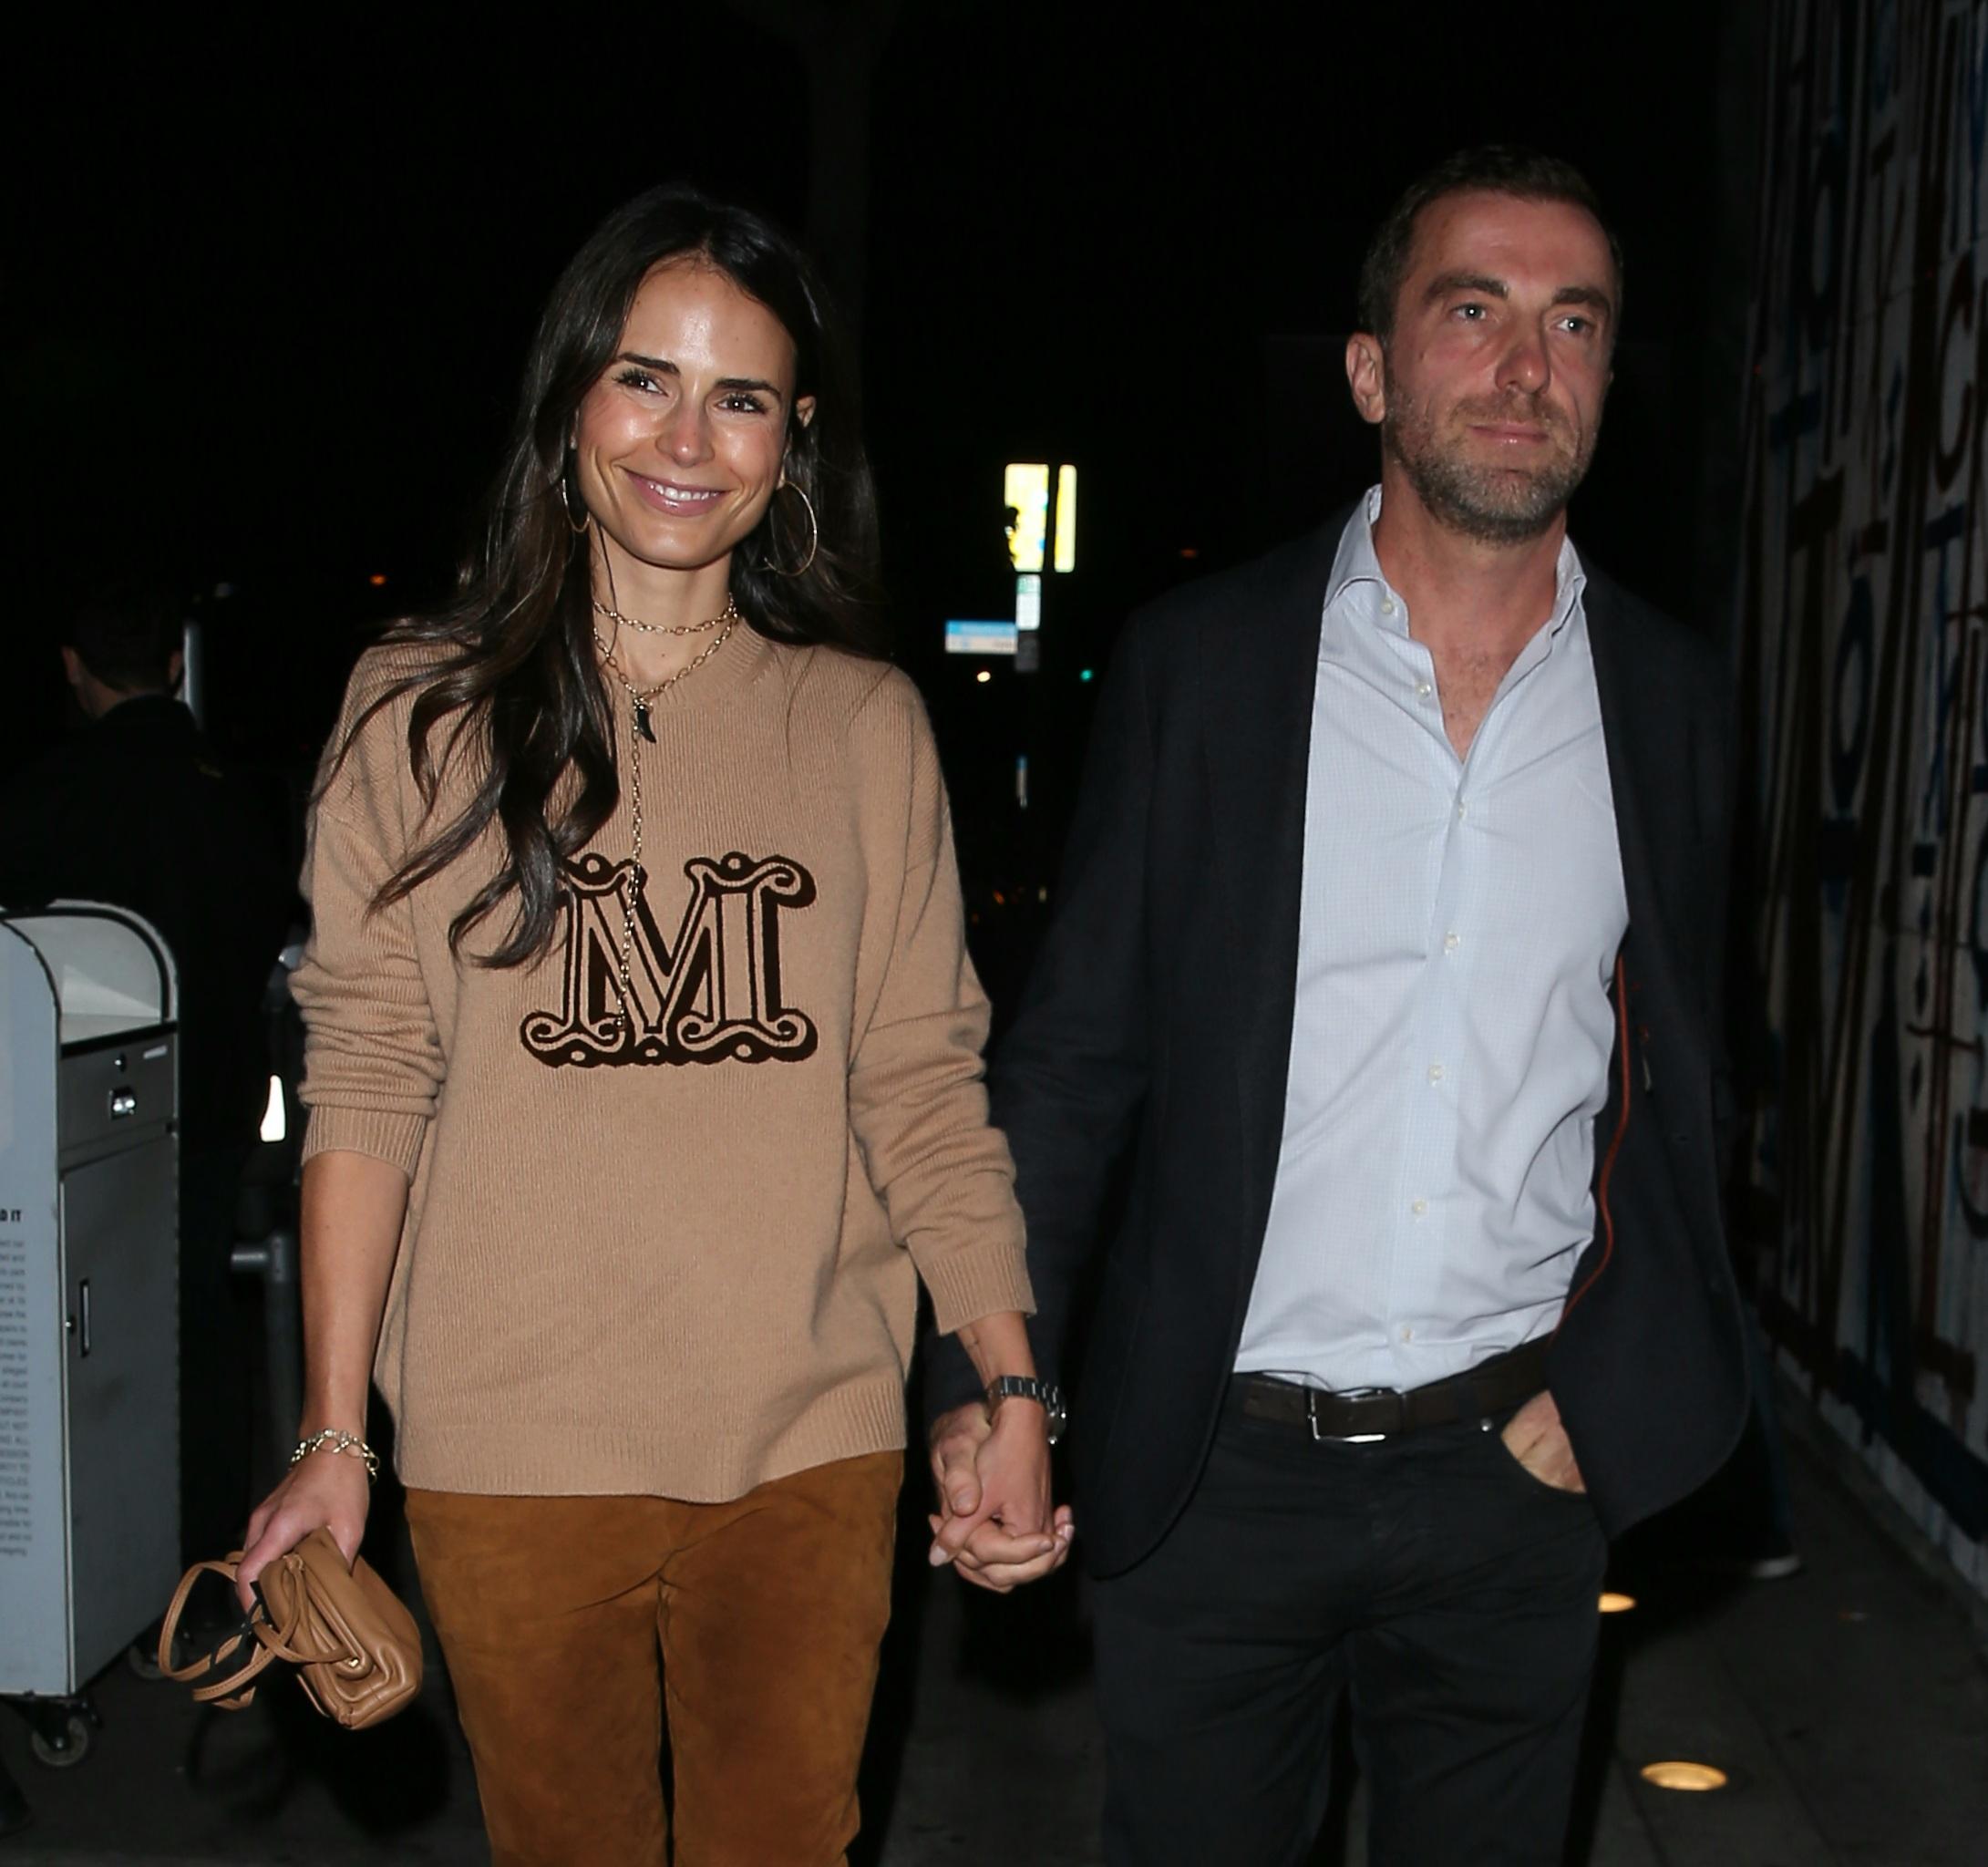 Jordana Brewster and her partner holding hands arriving for dinner at Craig apos s in West Hollywood